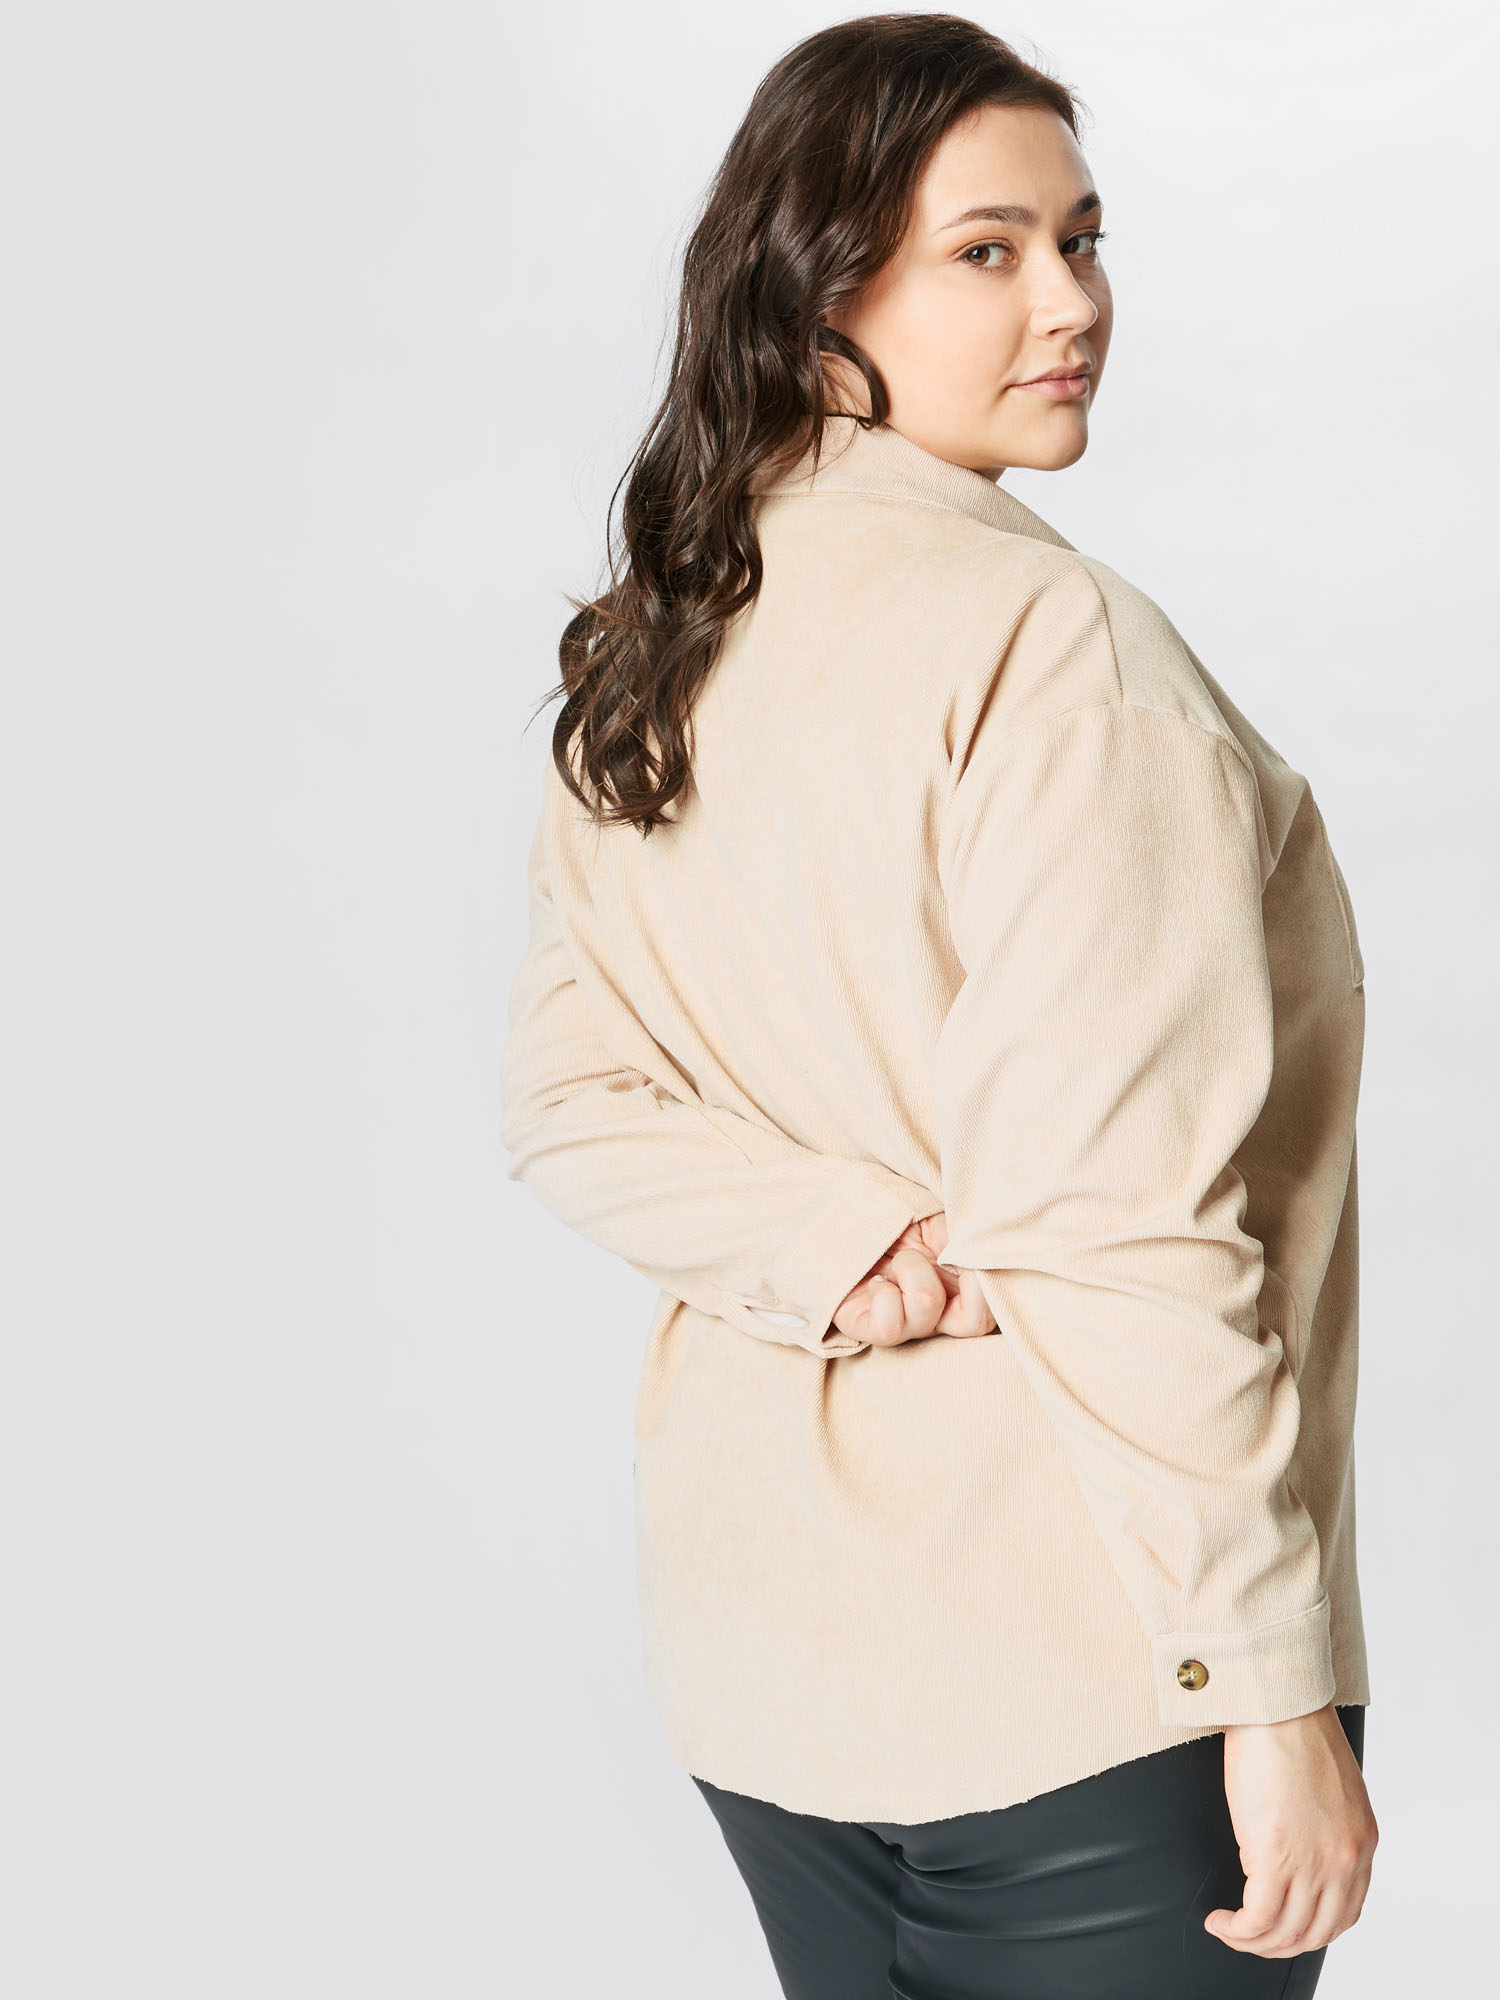 Missguided Plus Bluse in Beige 